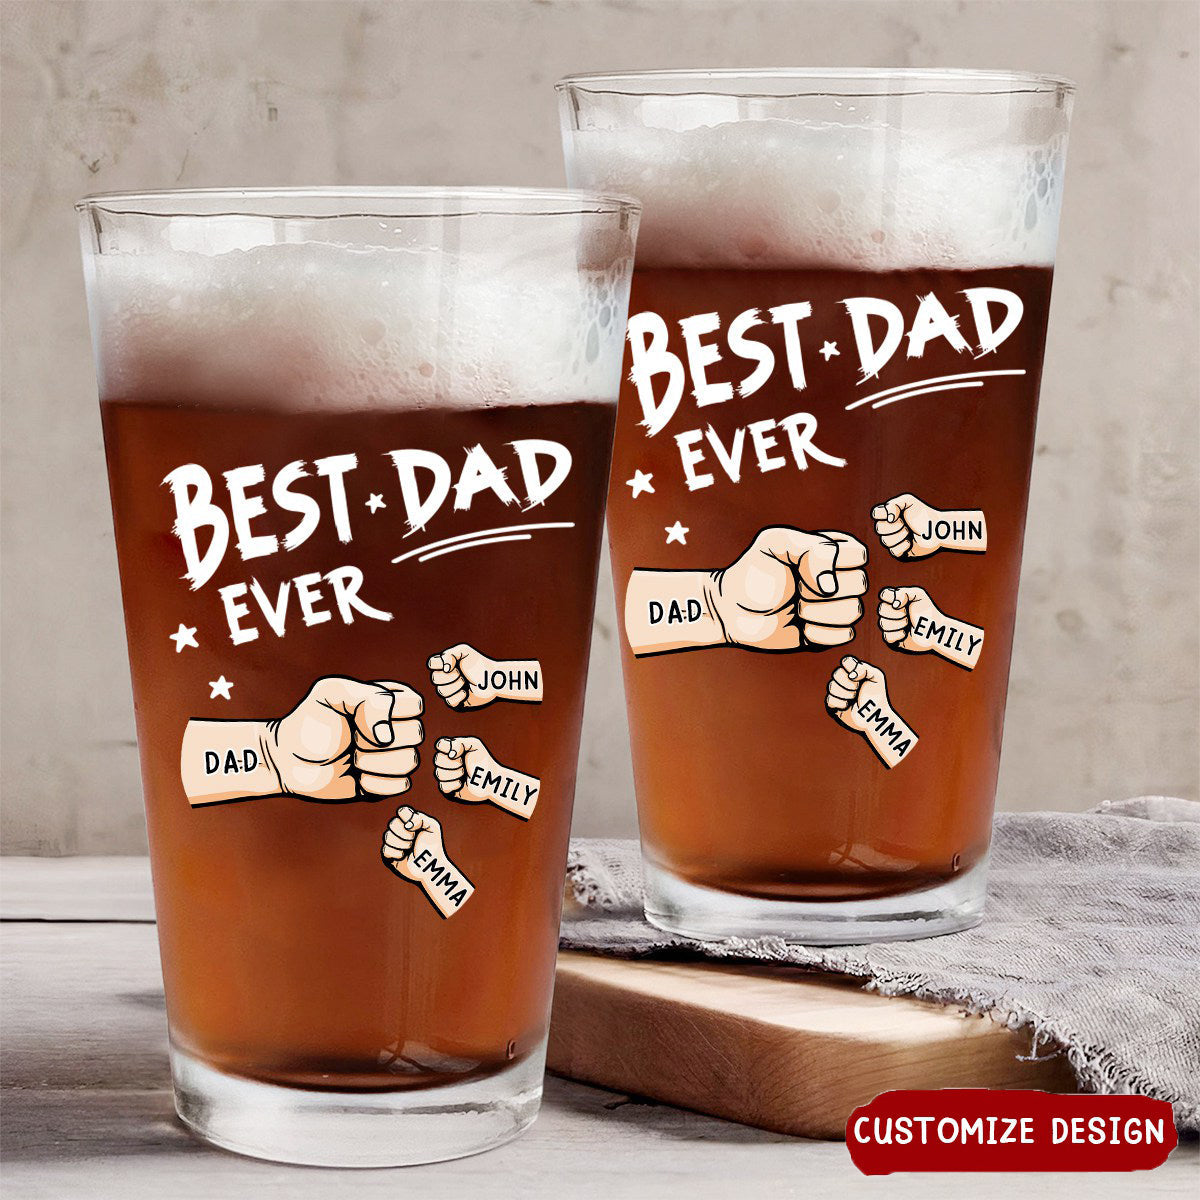 The Best Dad Ever - Personalized Beer Glass - Gift For Dad, Father, Grandfather